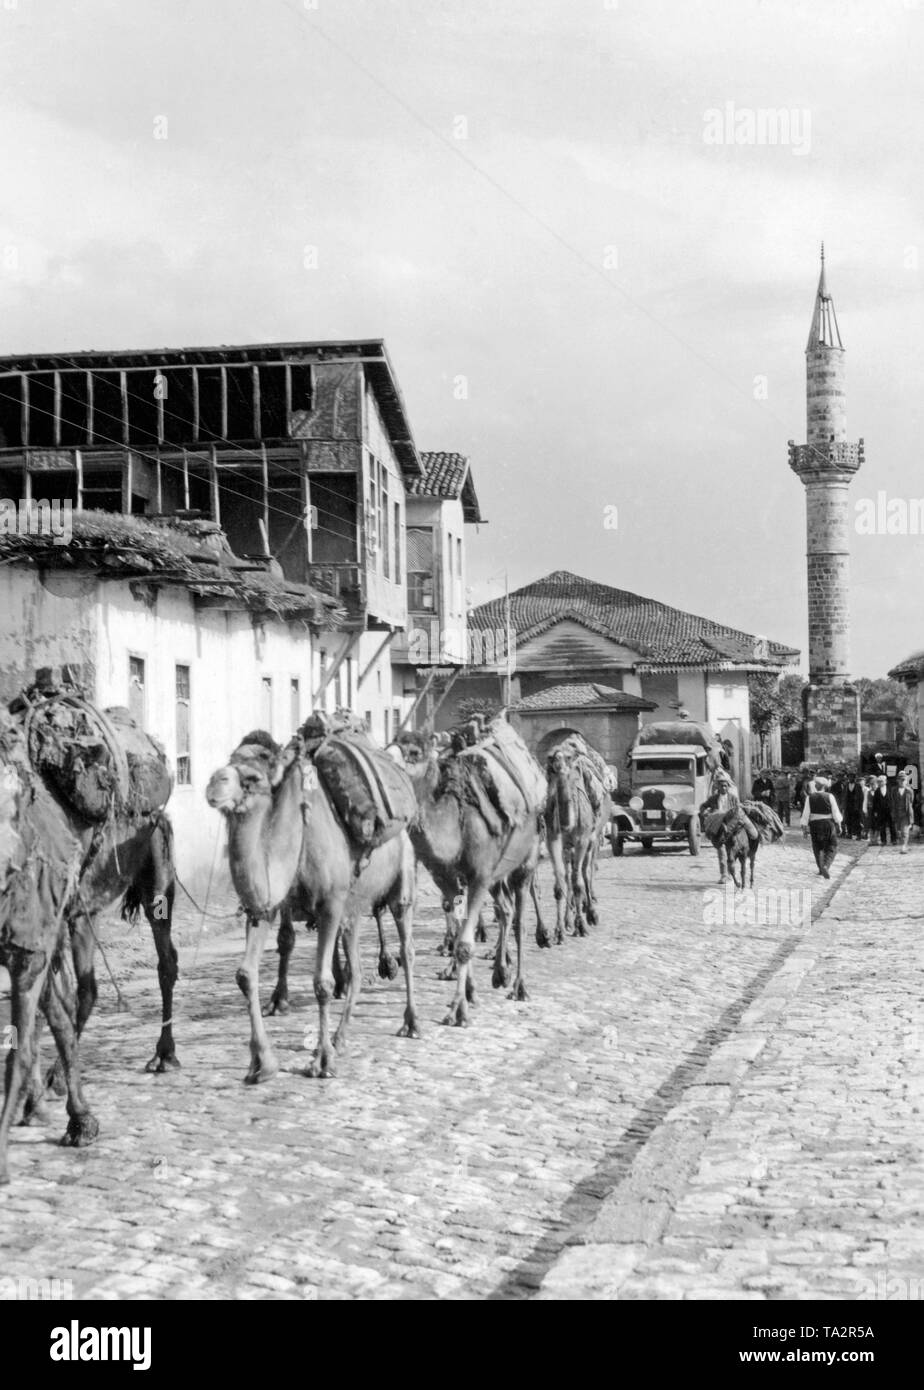 Street life in a city in central Turkey - in the background a mosque, on the road next to a loaded car a caravan of camels. Stock Photo